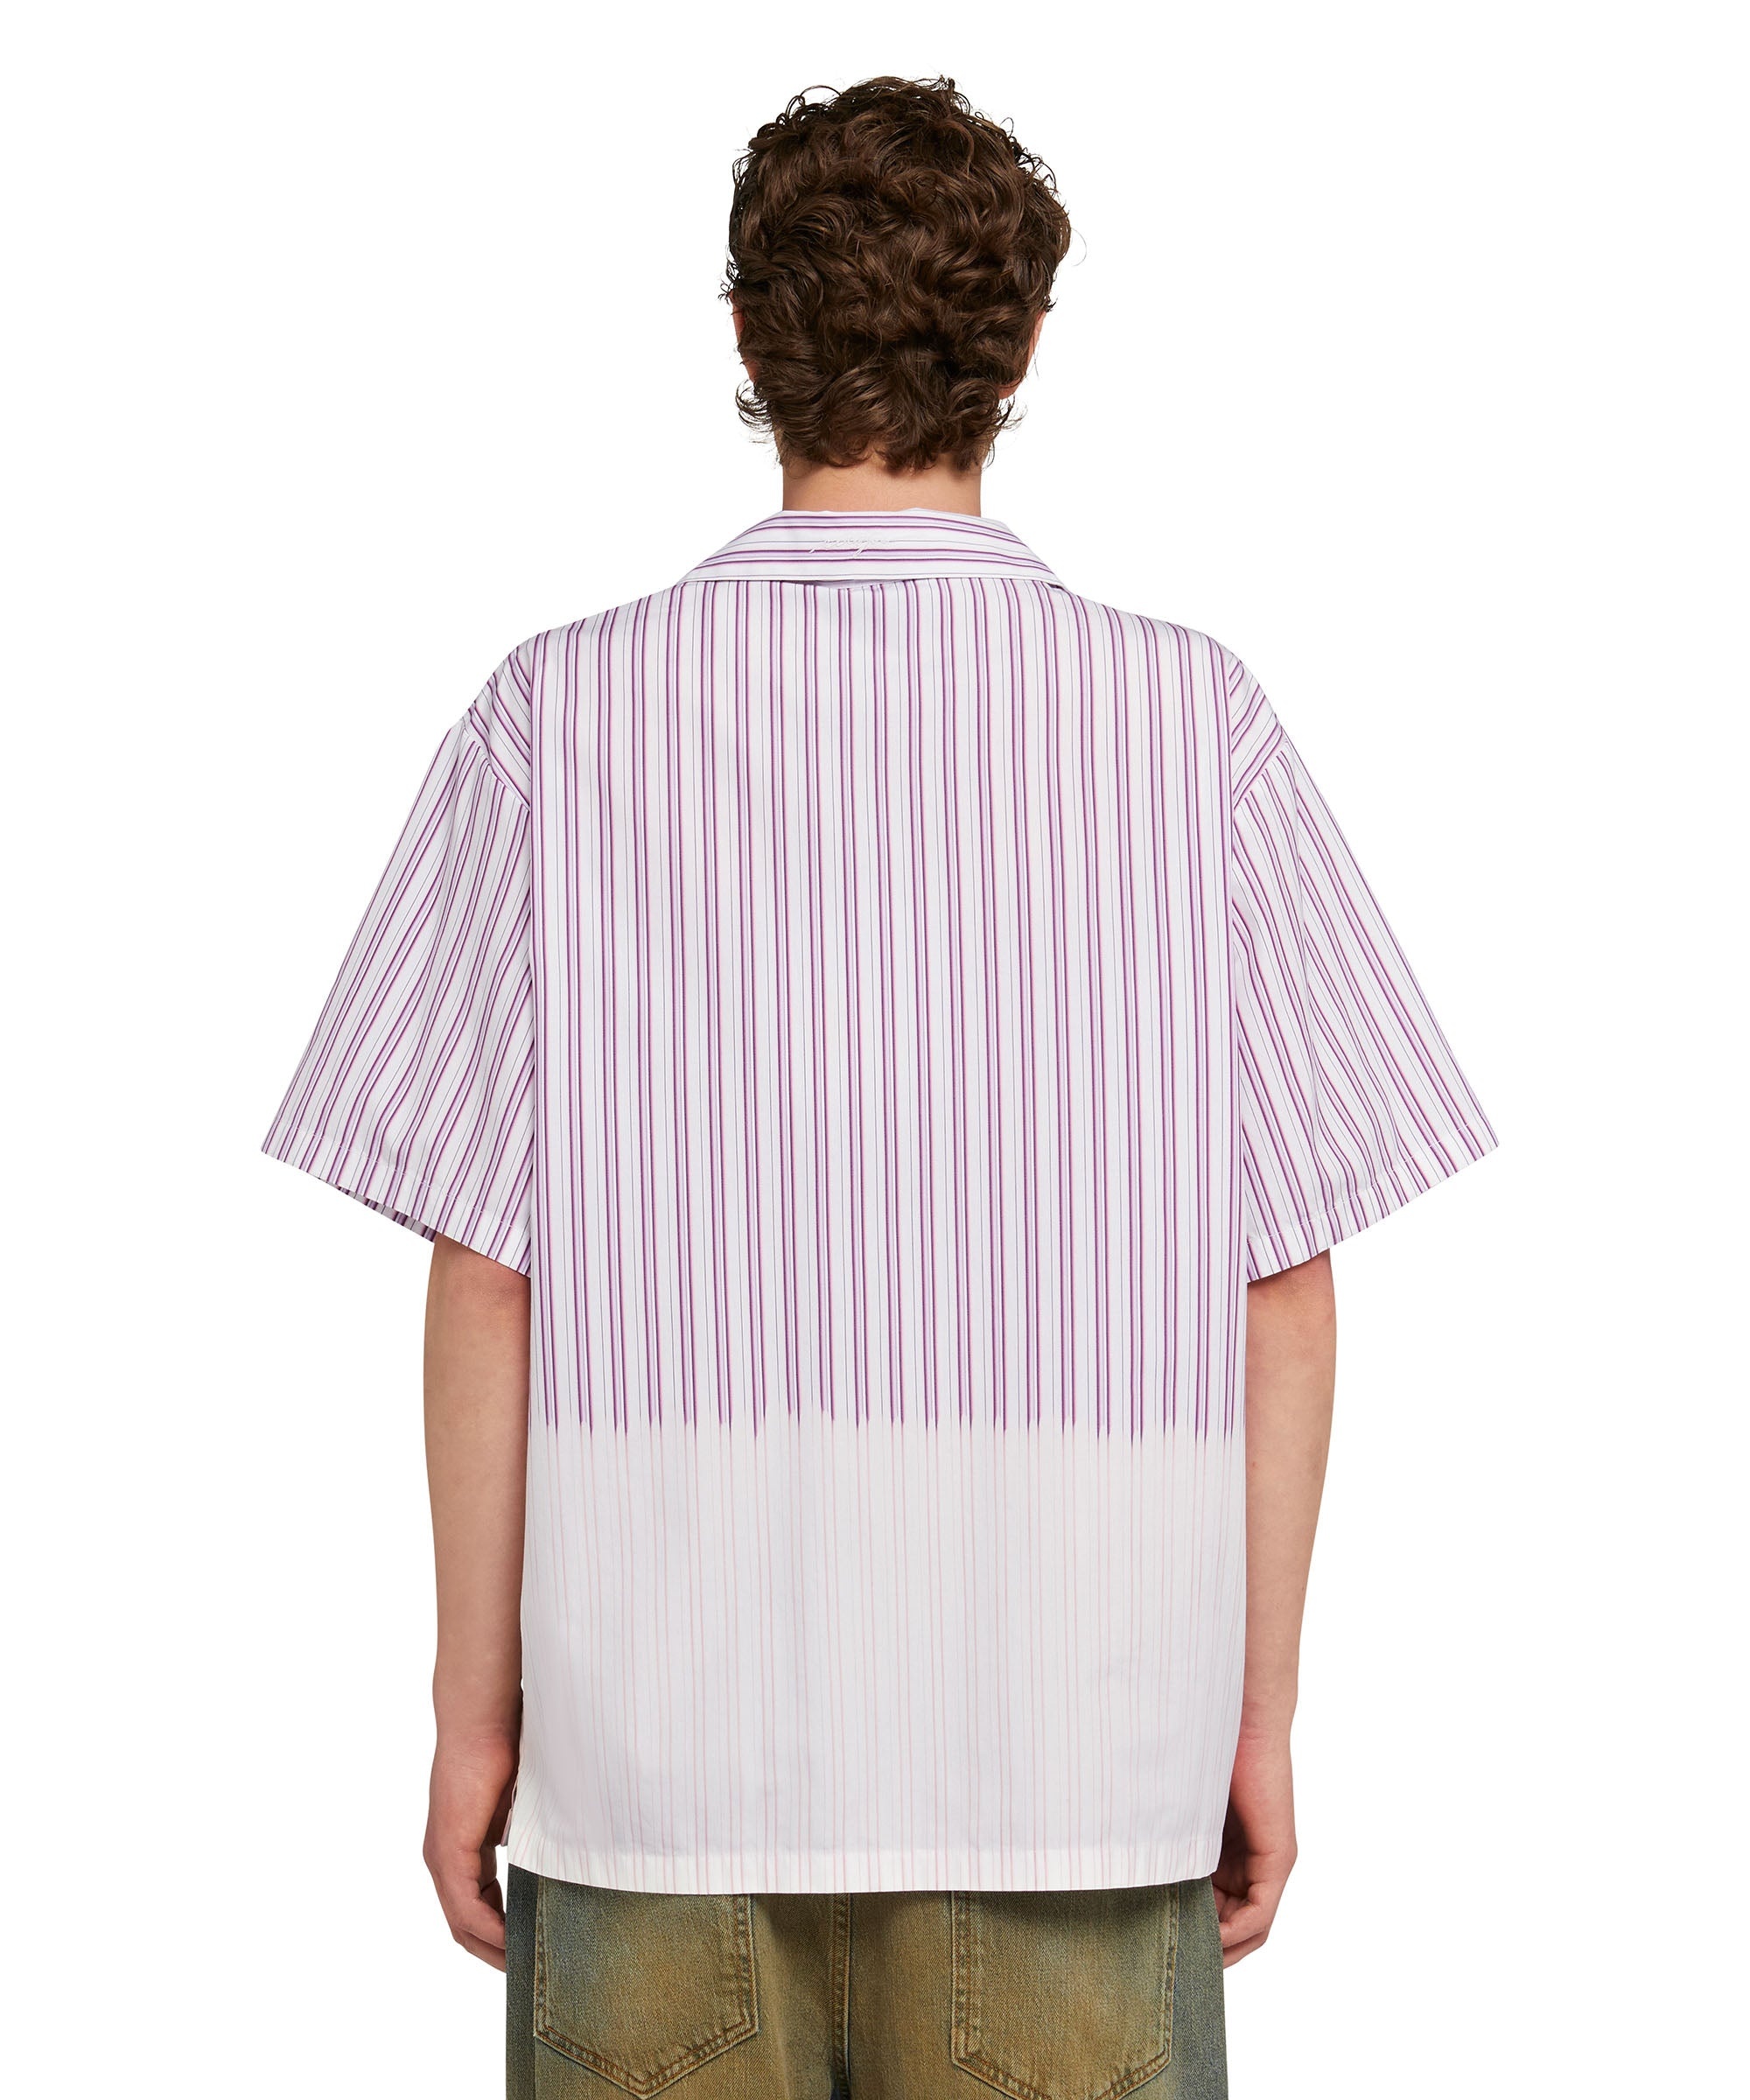 Poplin bowling shirt with faded treatment - 3